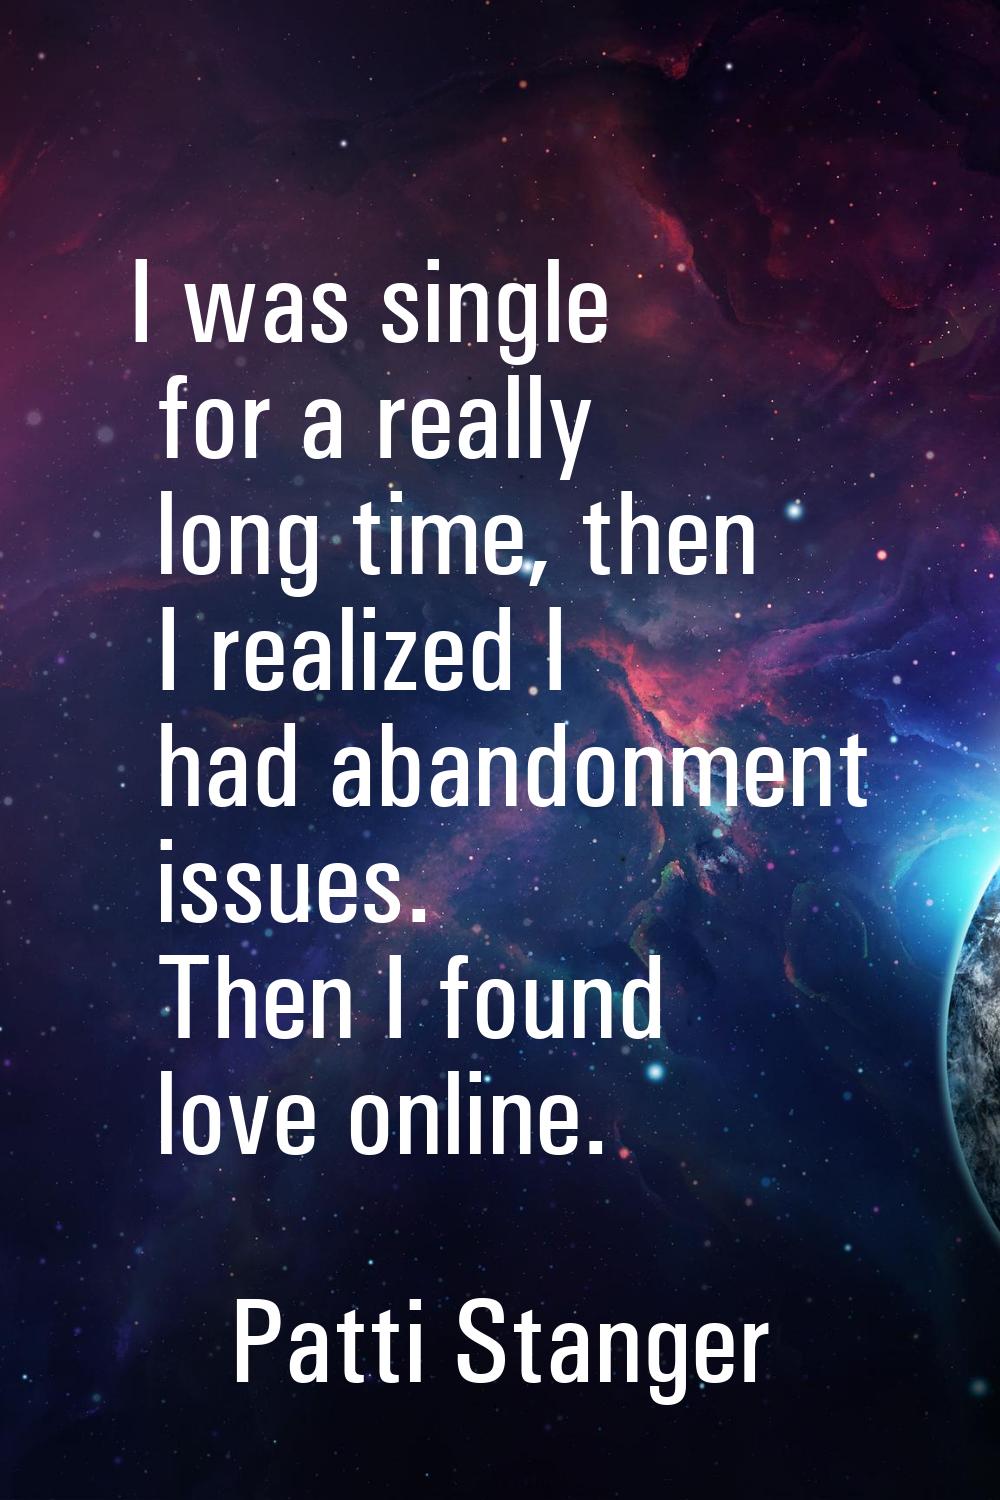 I was single for a really long time, then I realized I had abandonment issues. Then I found love on